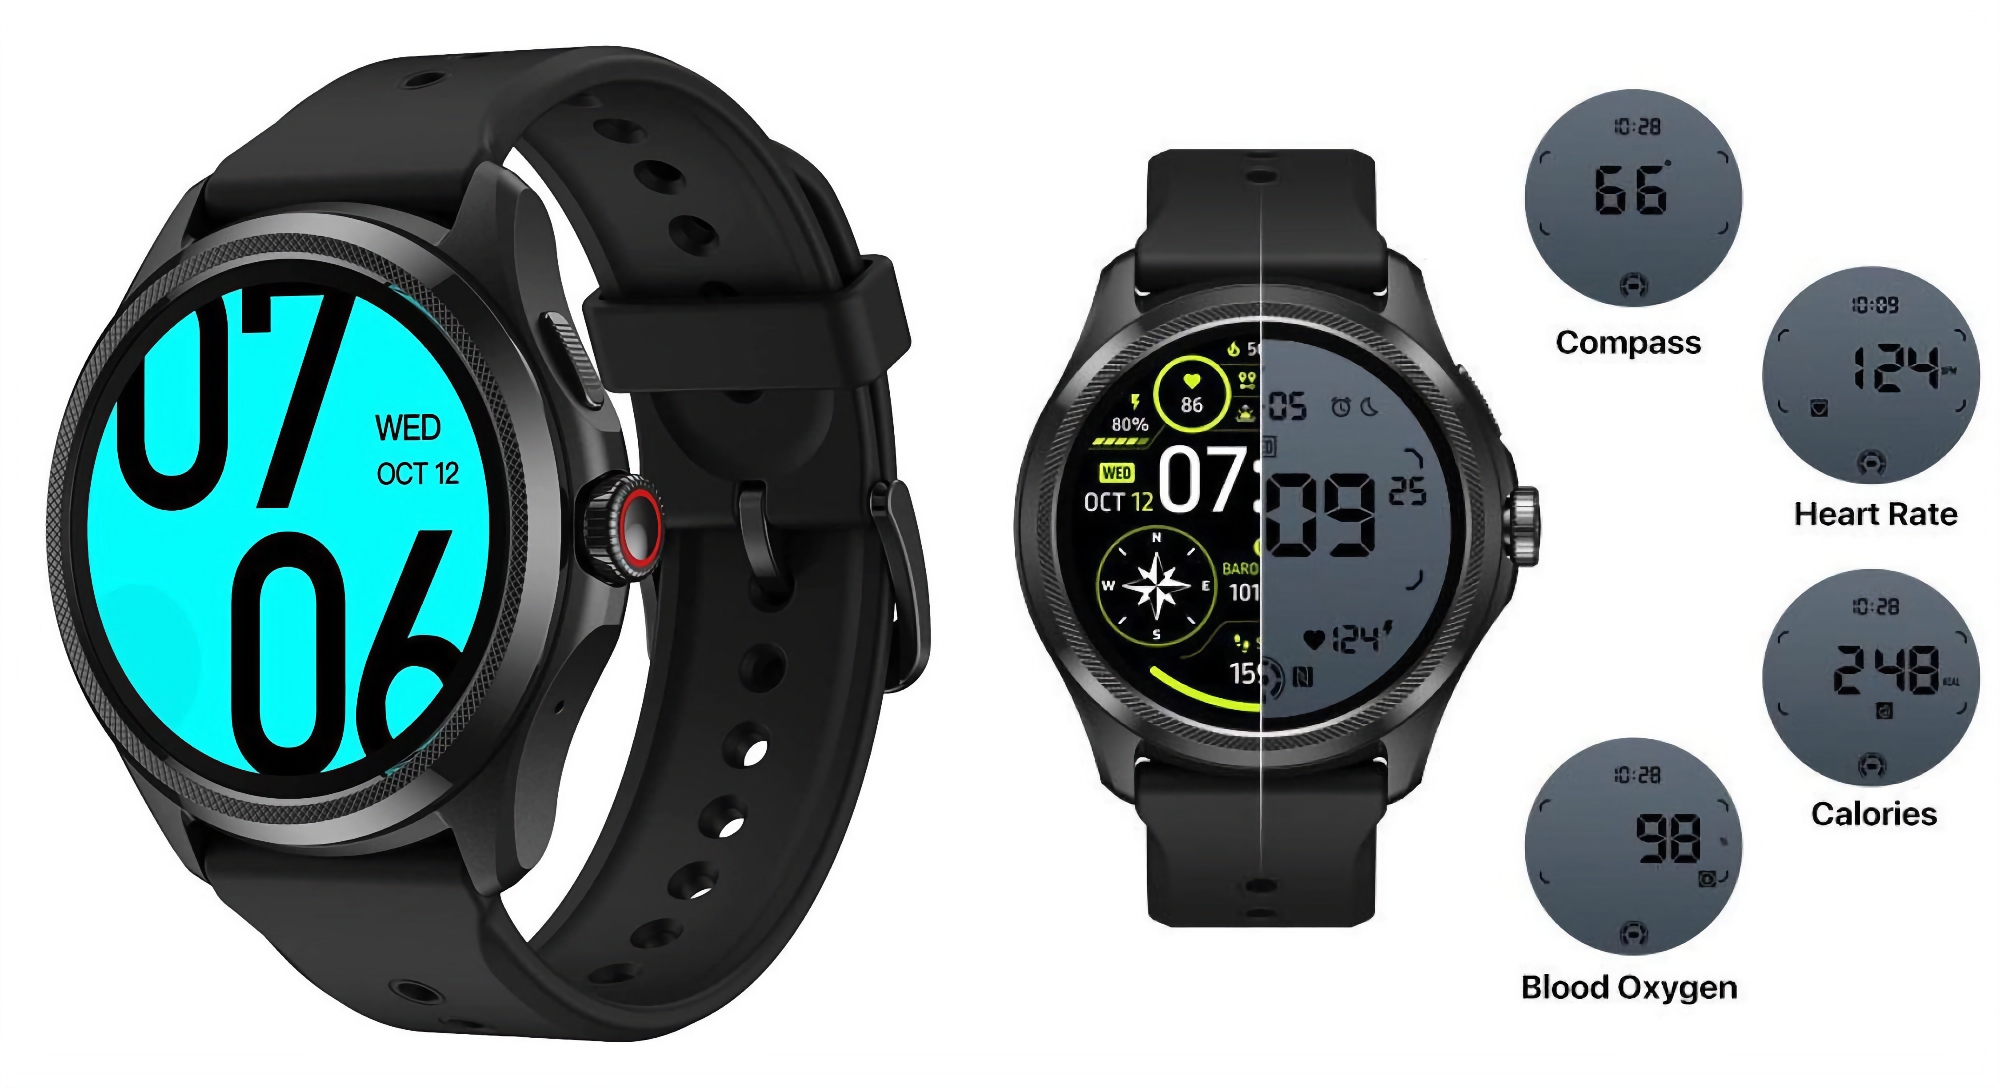 Mobvoi prepares the TicWatch Pro 5: it will be the first smartwatch on the market with the new Snapdragon W5+ Gen 1 processor on board